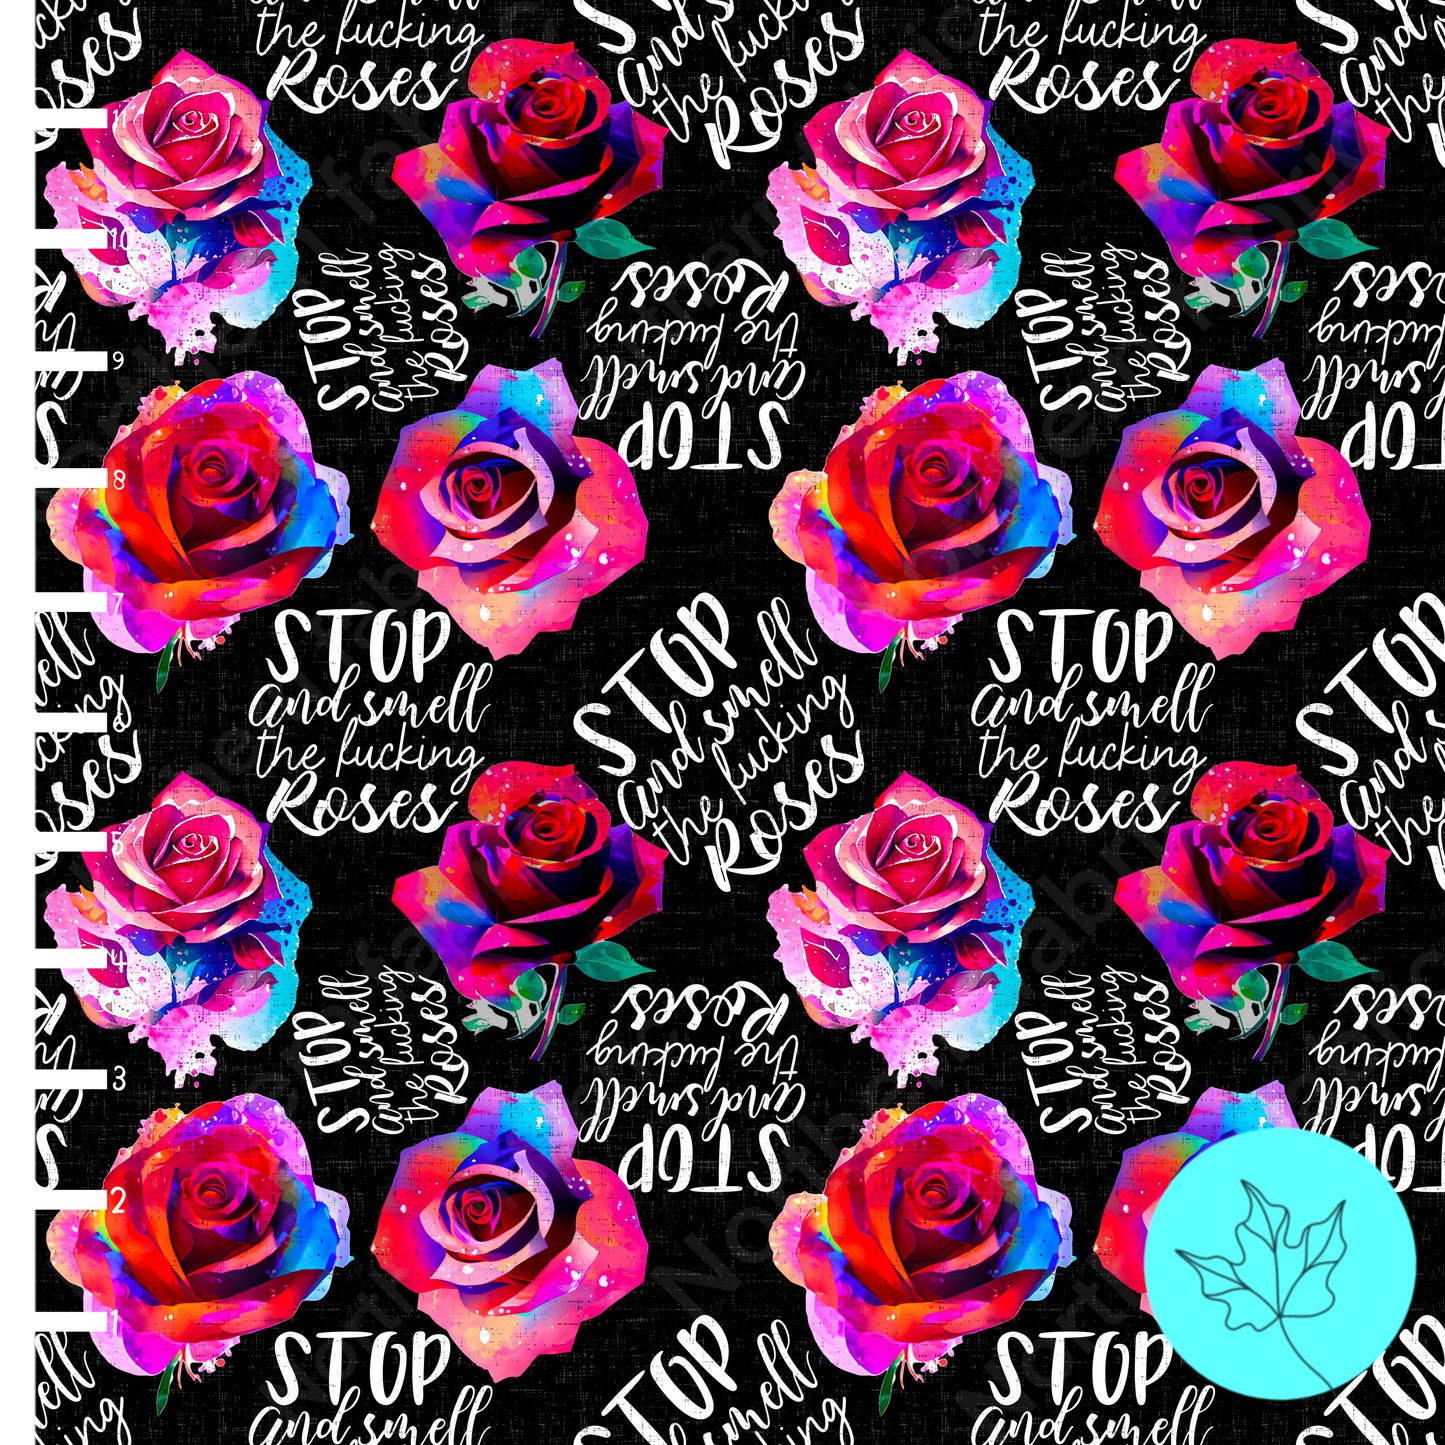 Stop and smell the roses (vibrant)